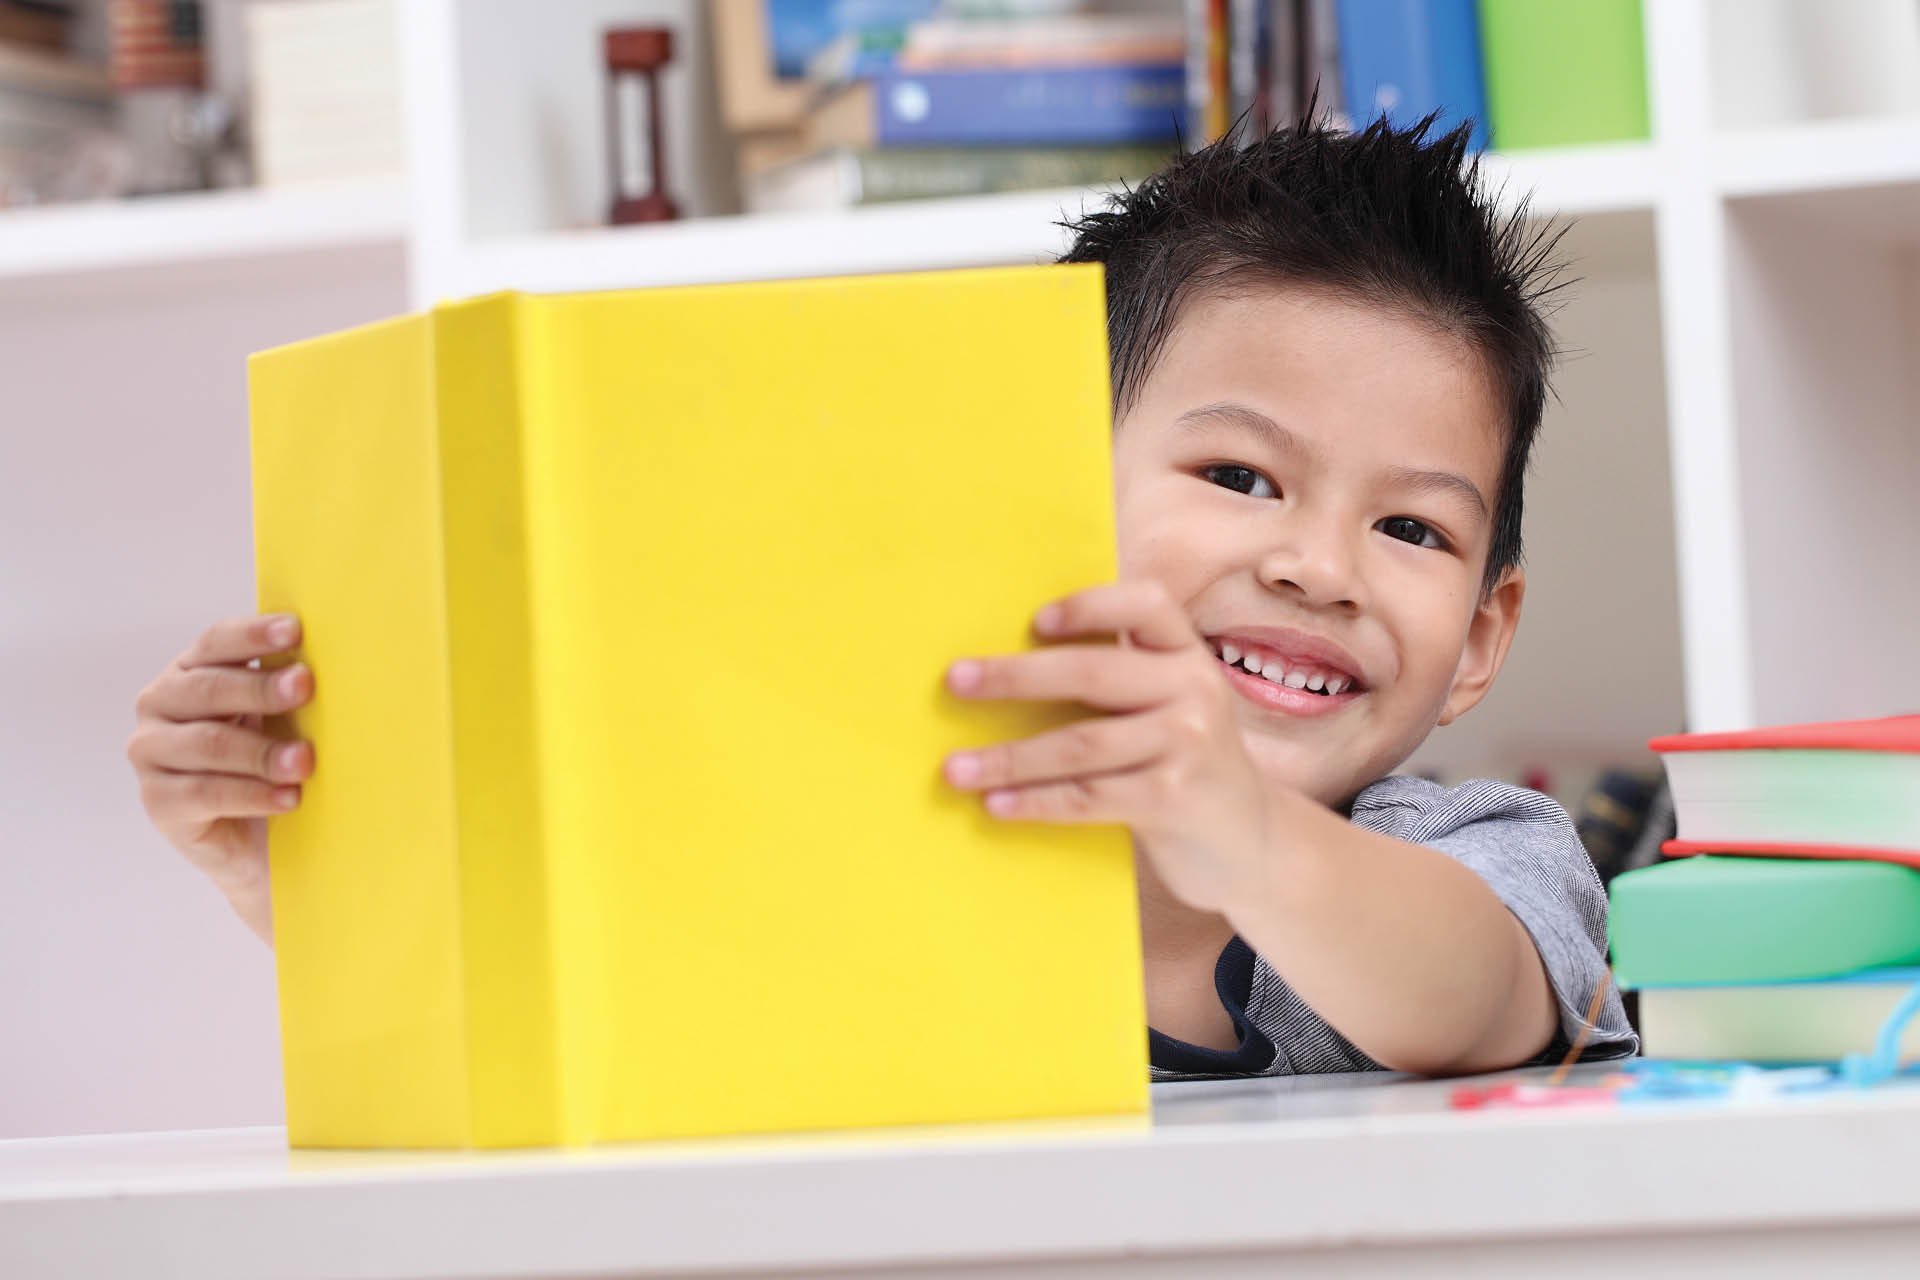 Young kid holding up yellow book and smiling